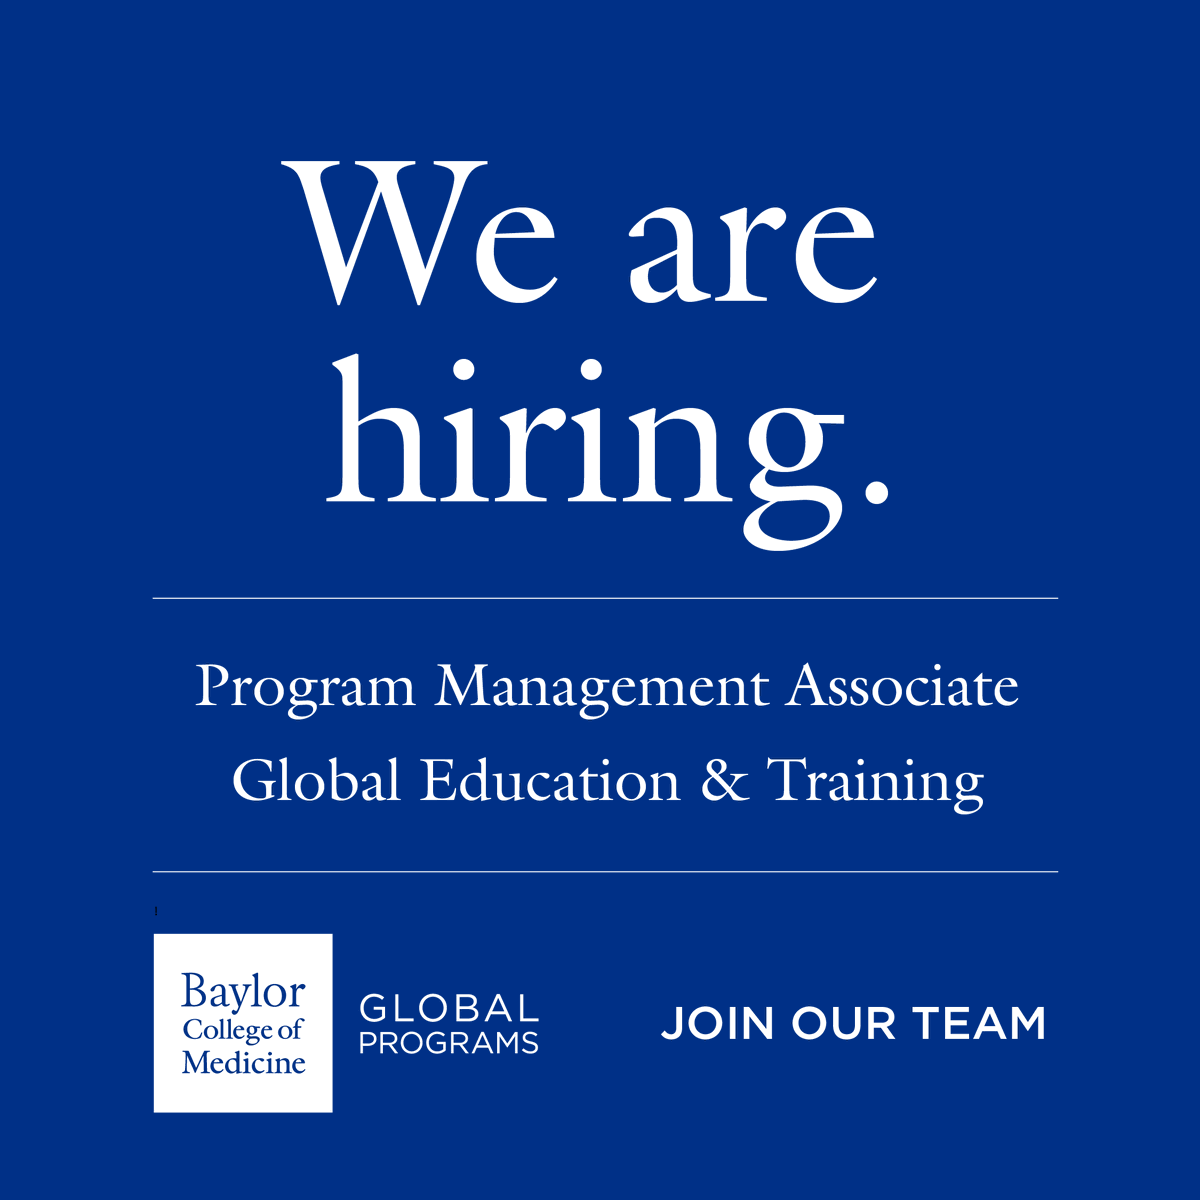 Global Programs is now hiring! We are looking for a Program Management Associate to manage day-to-day operations of our education & training initiatives! Click the link to learn more about this unique and enriching position! jobs.bcm.edu/job-invite/189…